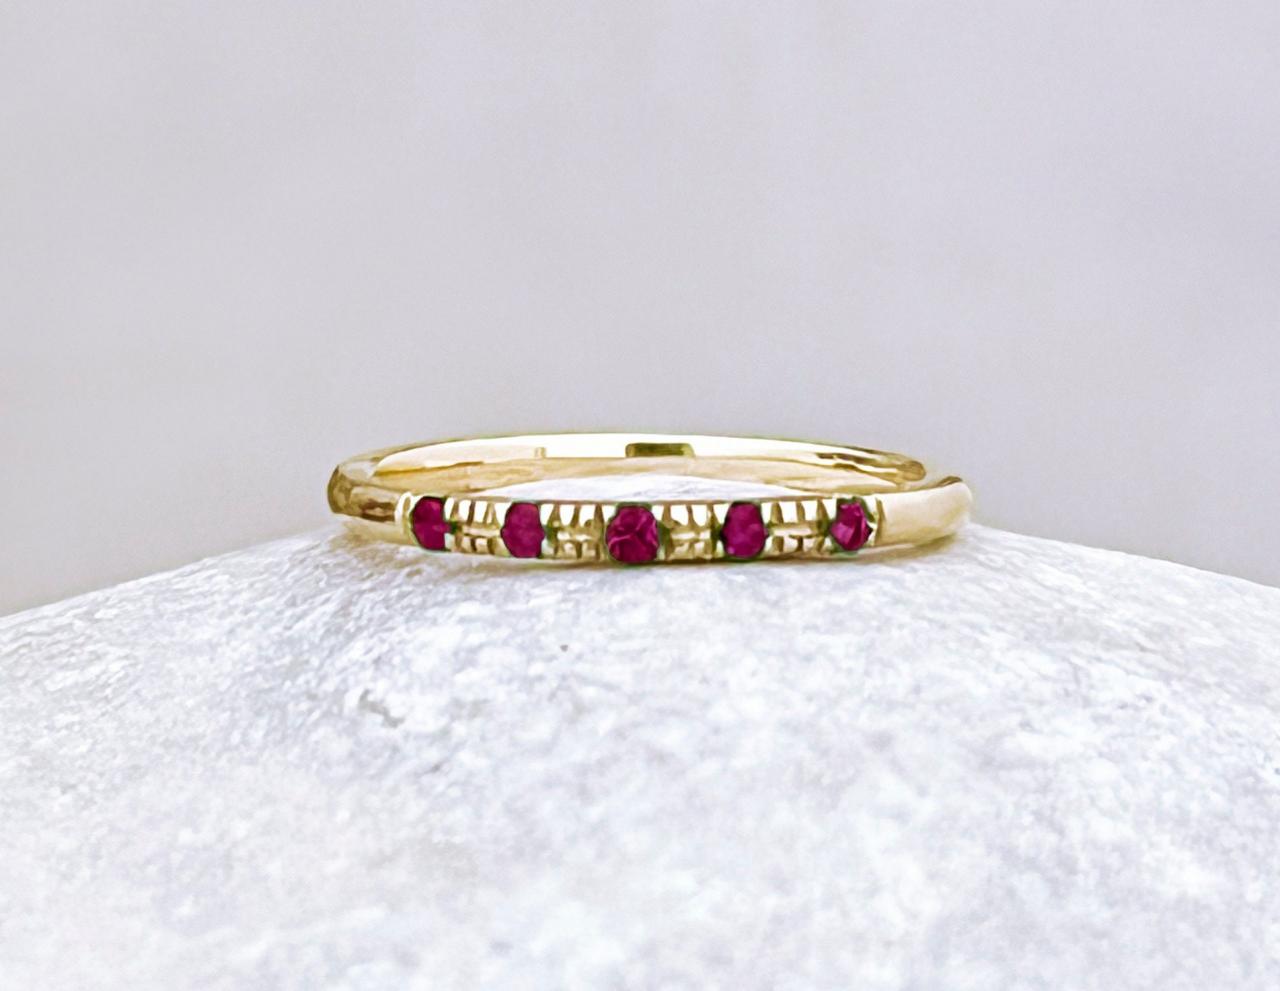 Wedding Solid Gold Band With Ruby Stones, 18k Delicate Stacking Ring, Natural Gemstones Minimalist Promise Band Ring